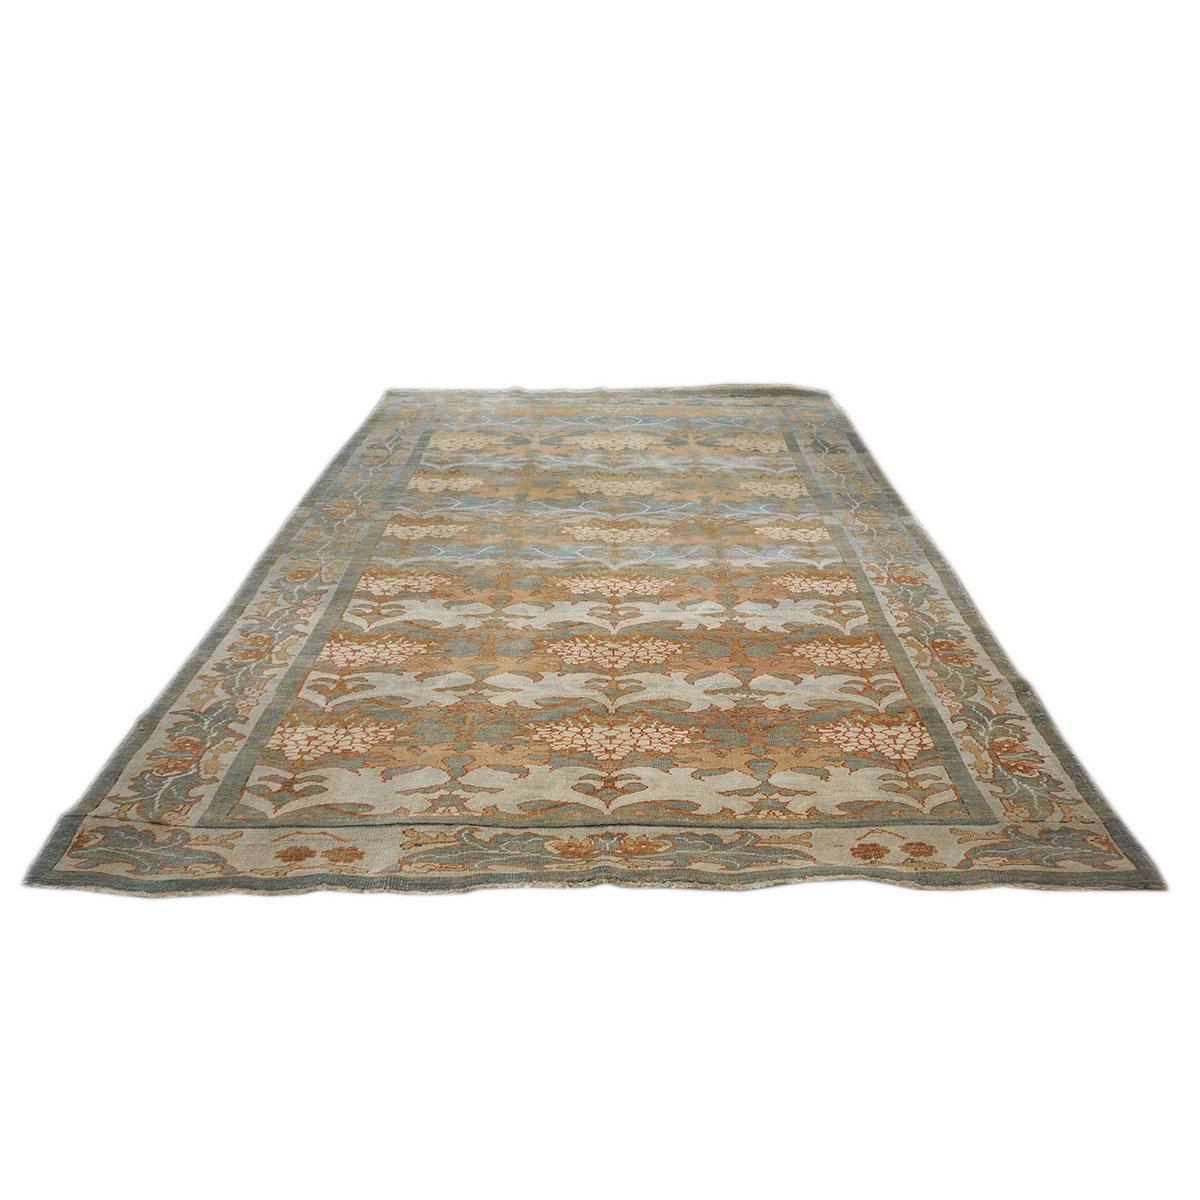 Oushak 21st Century Turkish Donegal Carpet 8x11 Blue, Green, & Salmon Area Rug For Sale